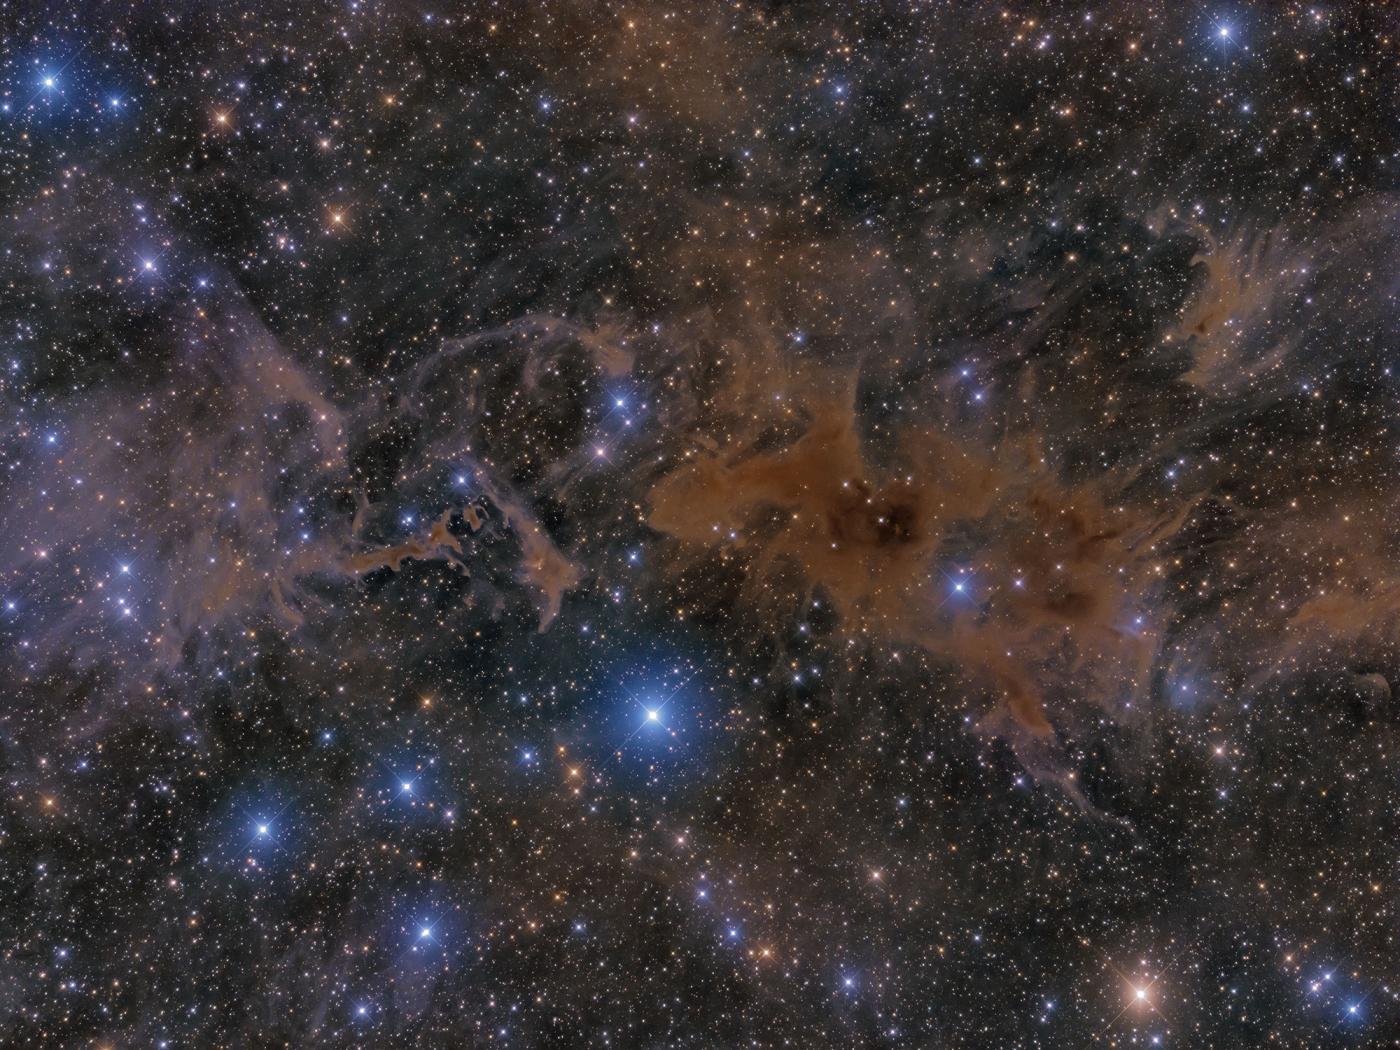 An image showing 'LBN 552 & LDN 1228 in Cepheus'